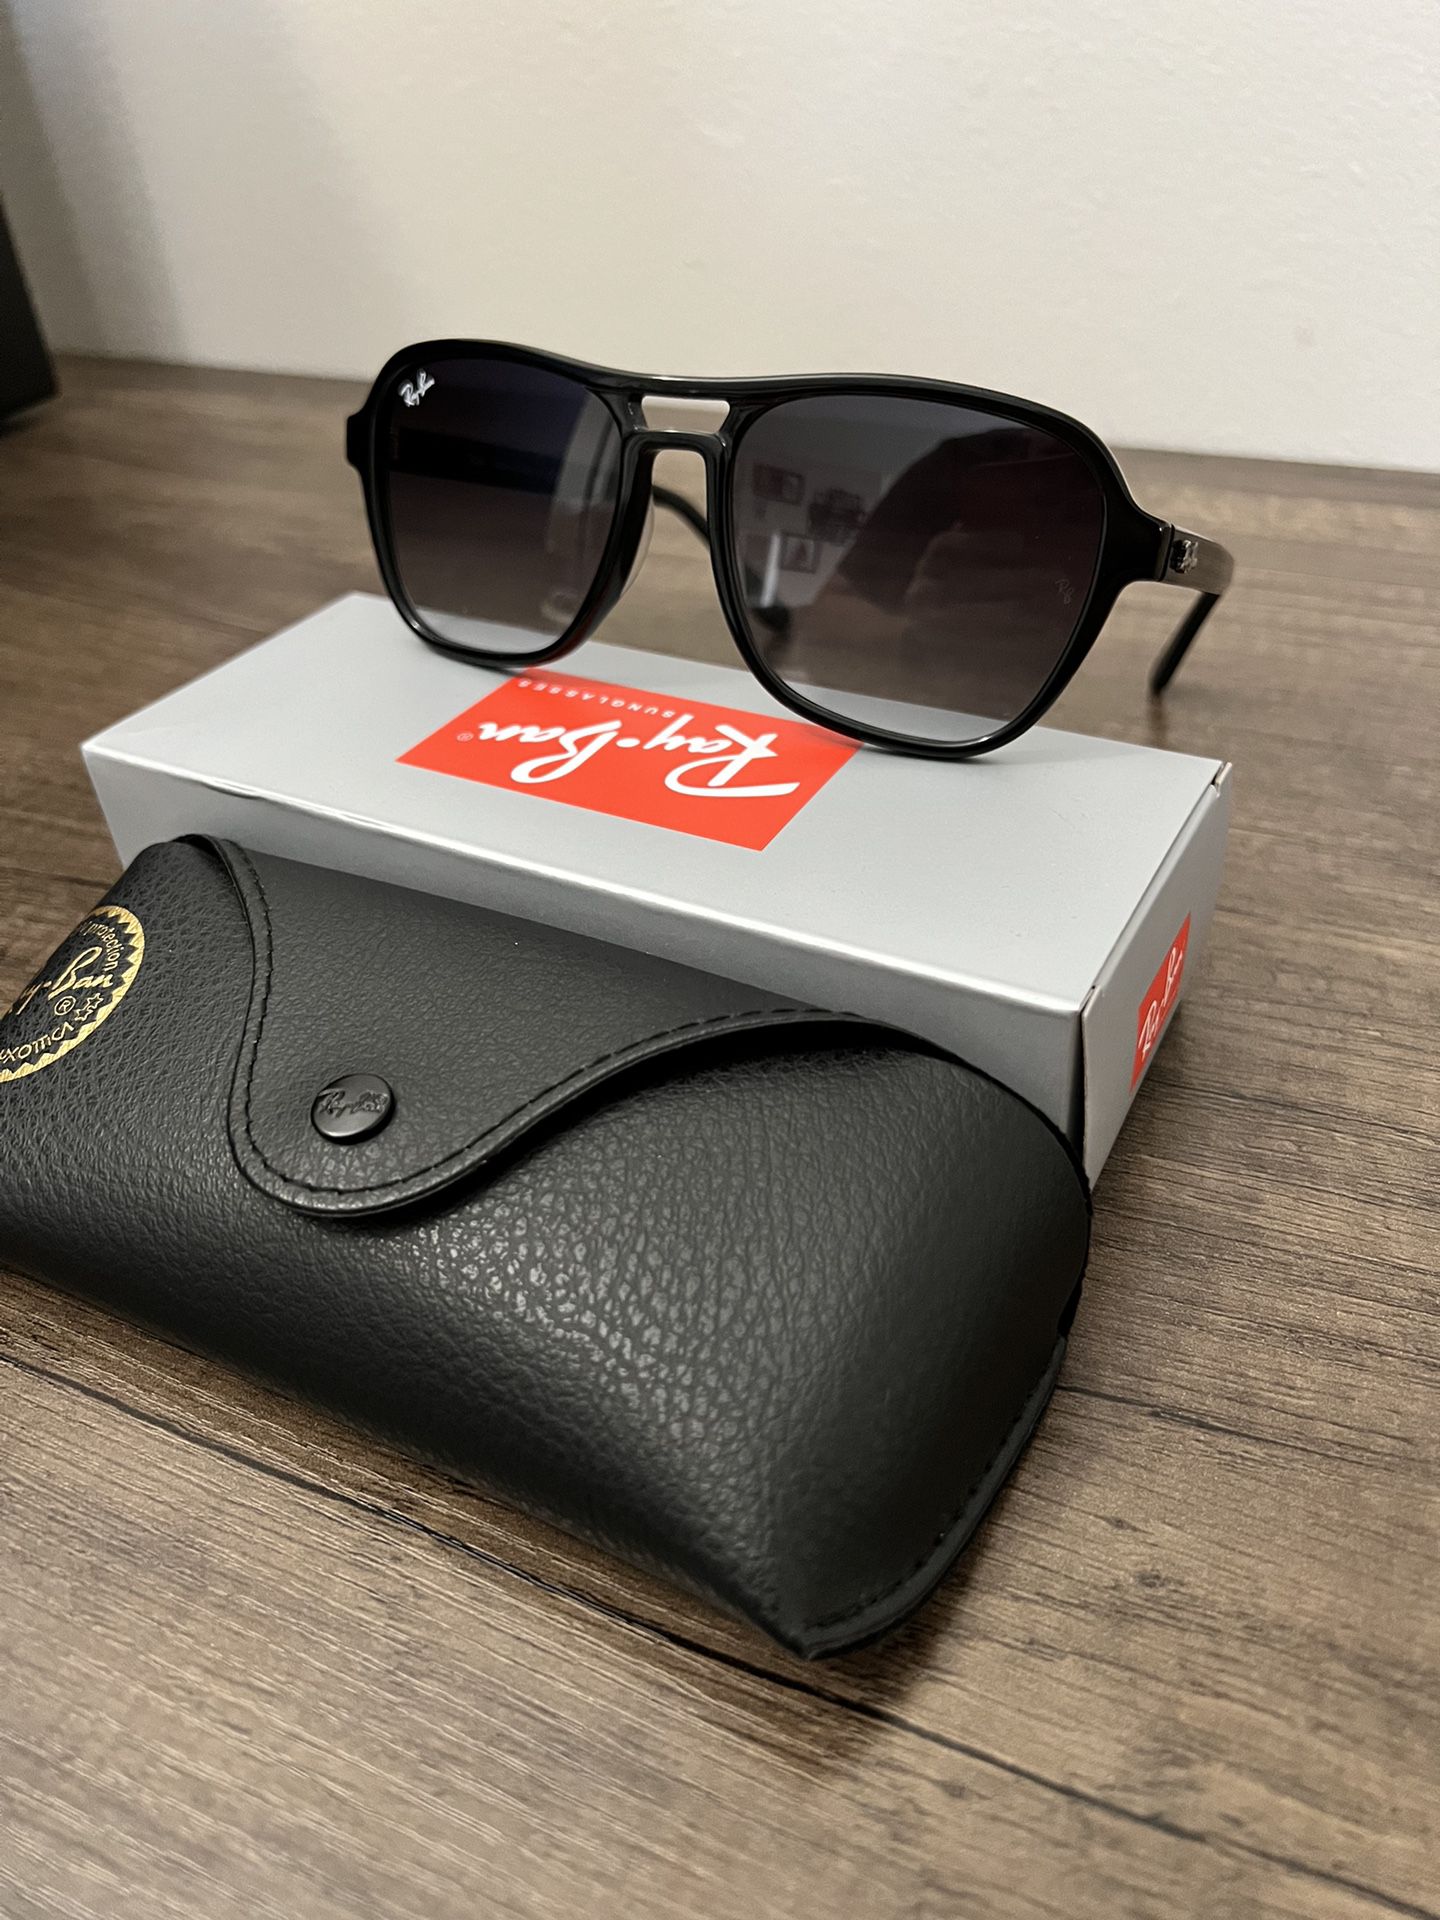 RayBan Sunglasses Ray Ban Packaging for Sale in El CA - OfferUp